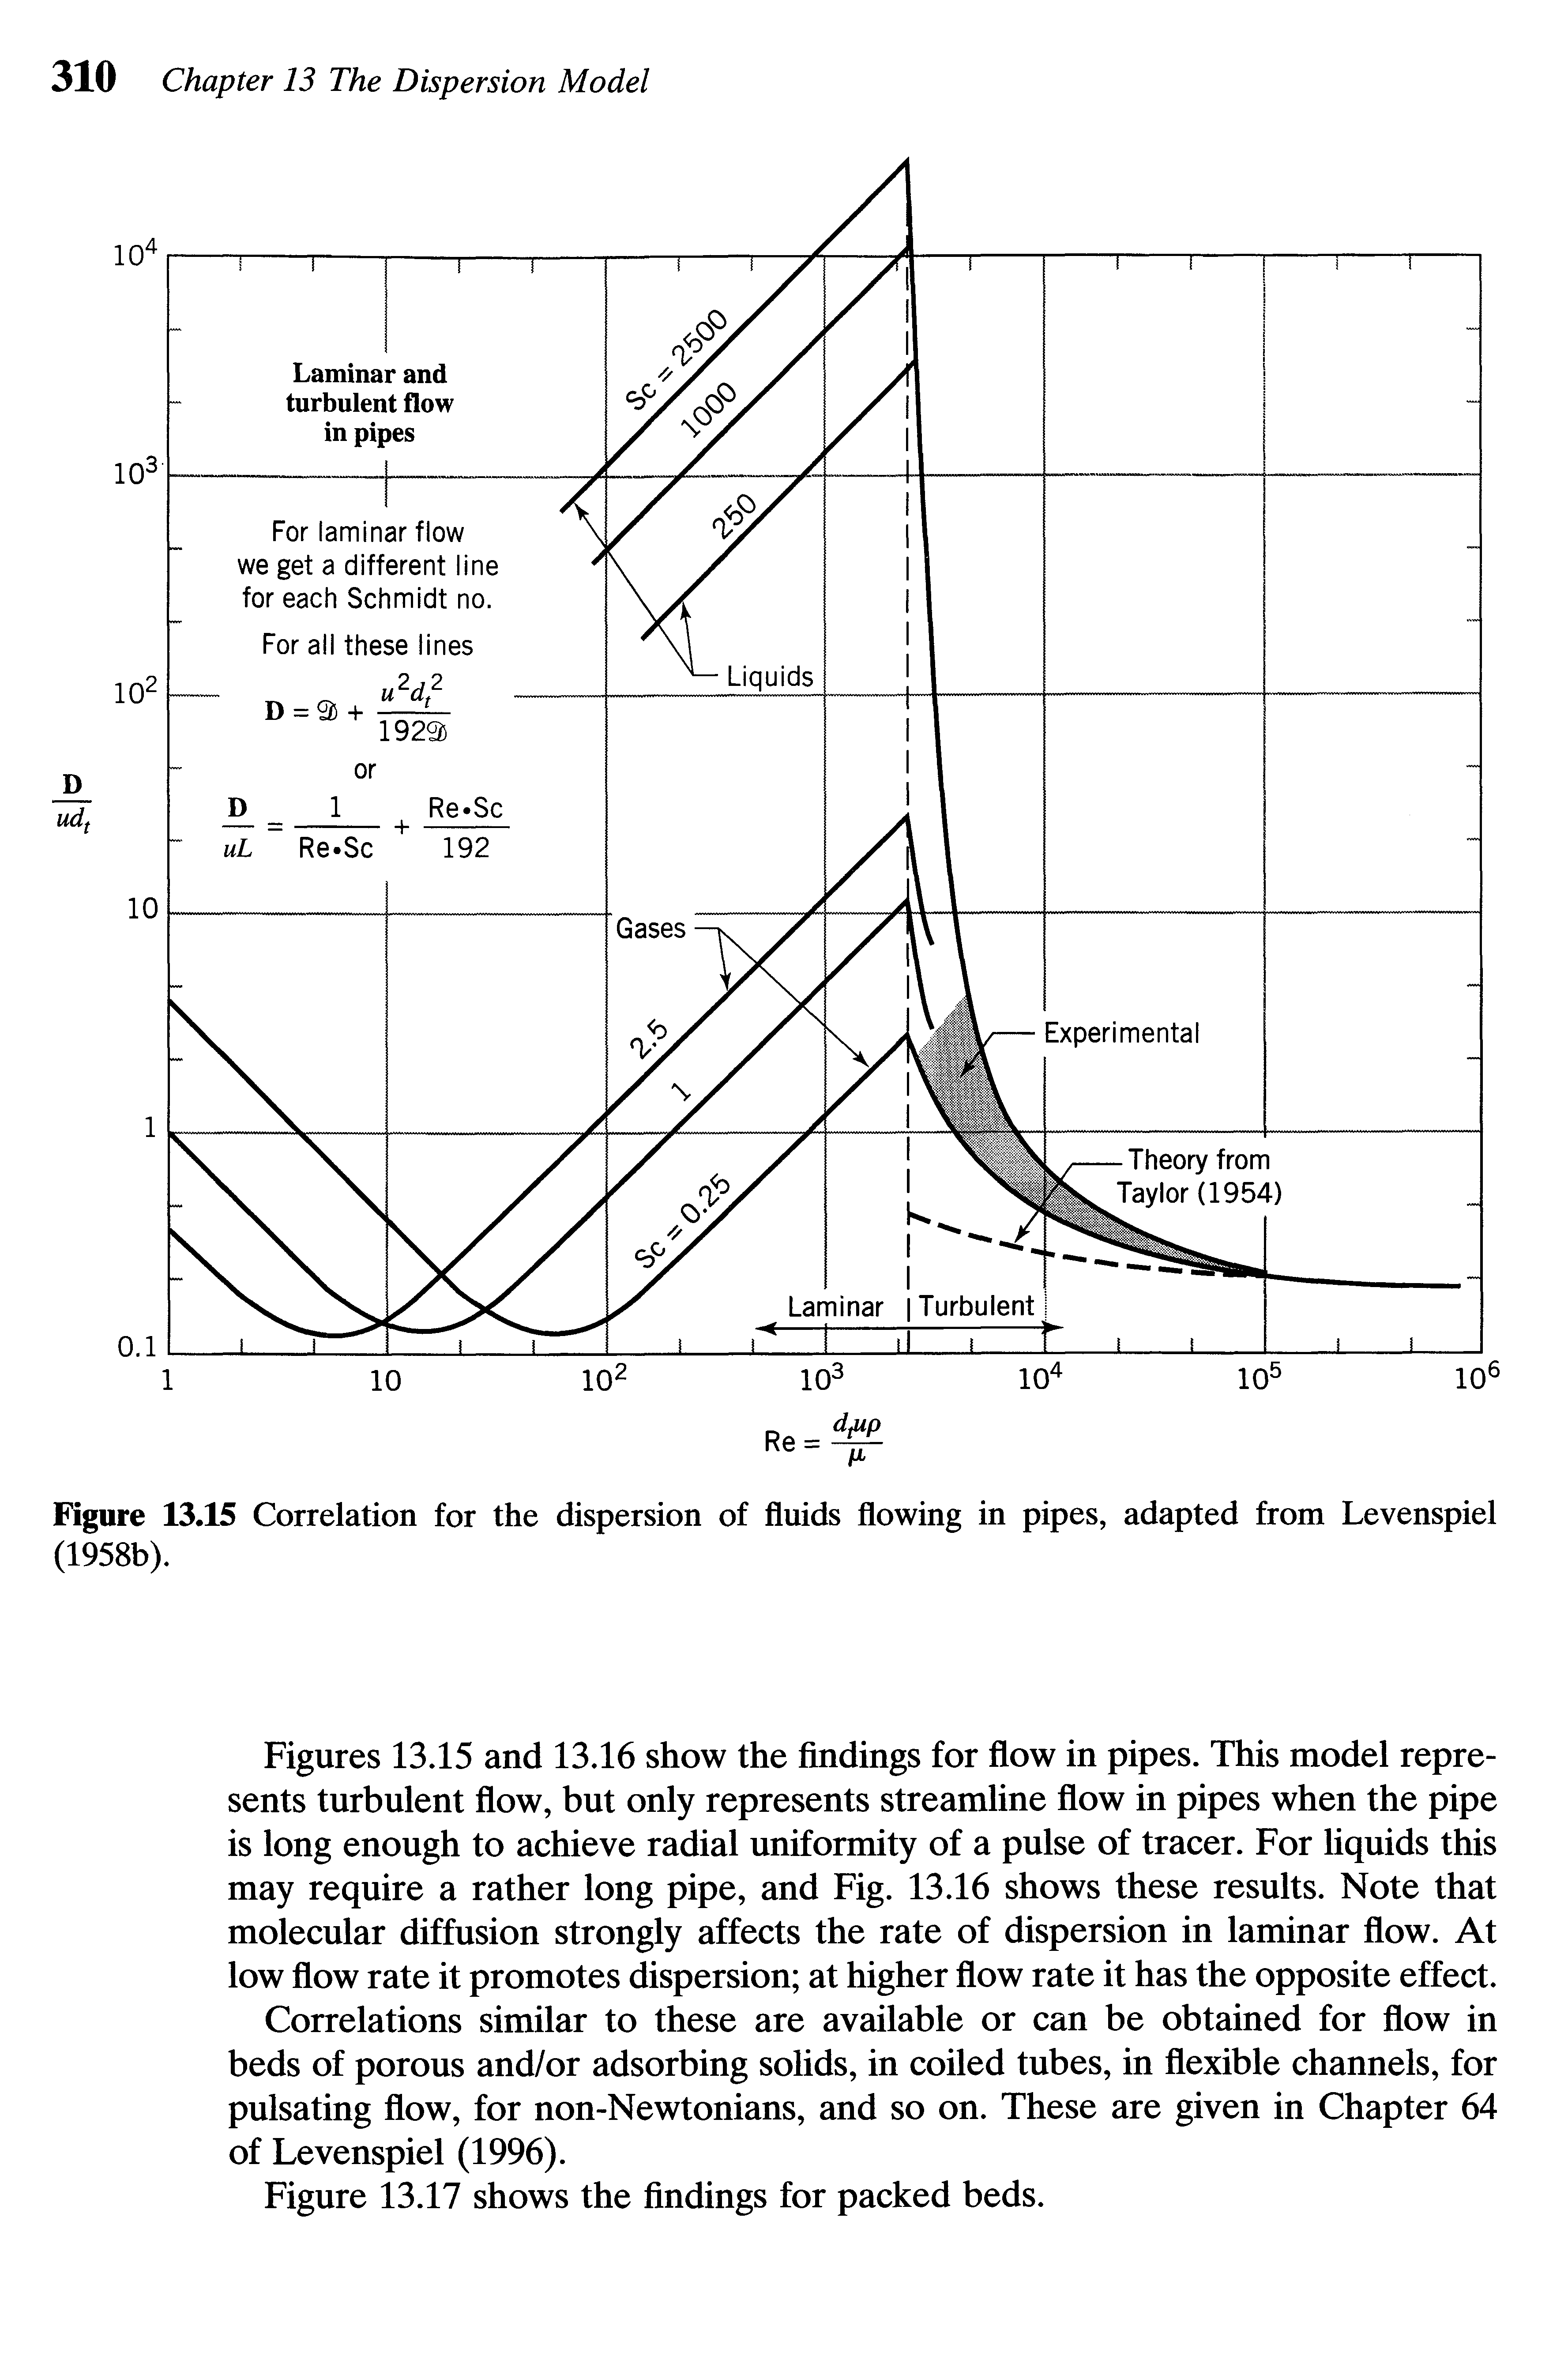 Figure 13.15 Correlation for the dispersion of fluids flowing in pipes, adapted from Levenspiel (1958b).